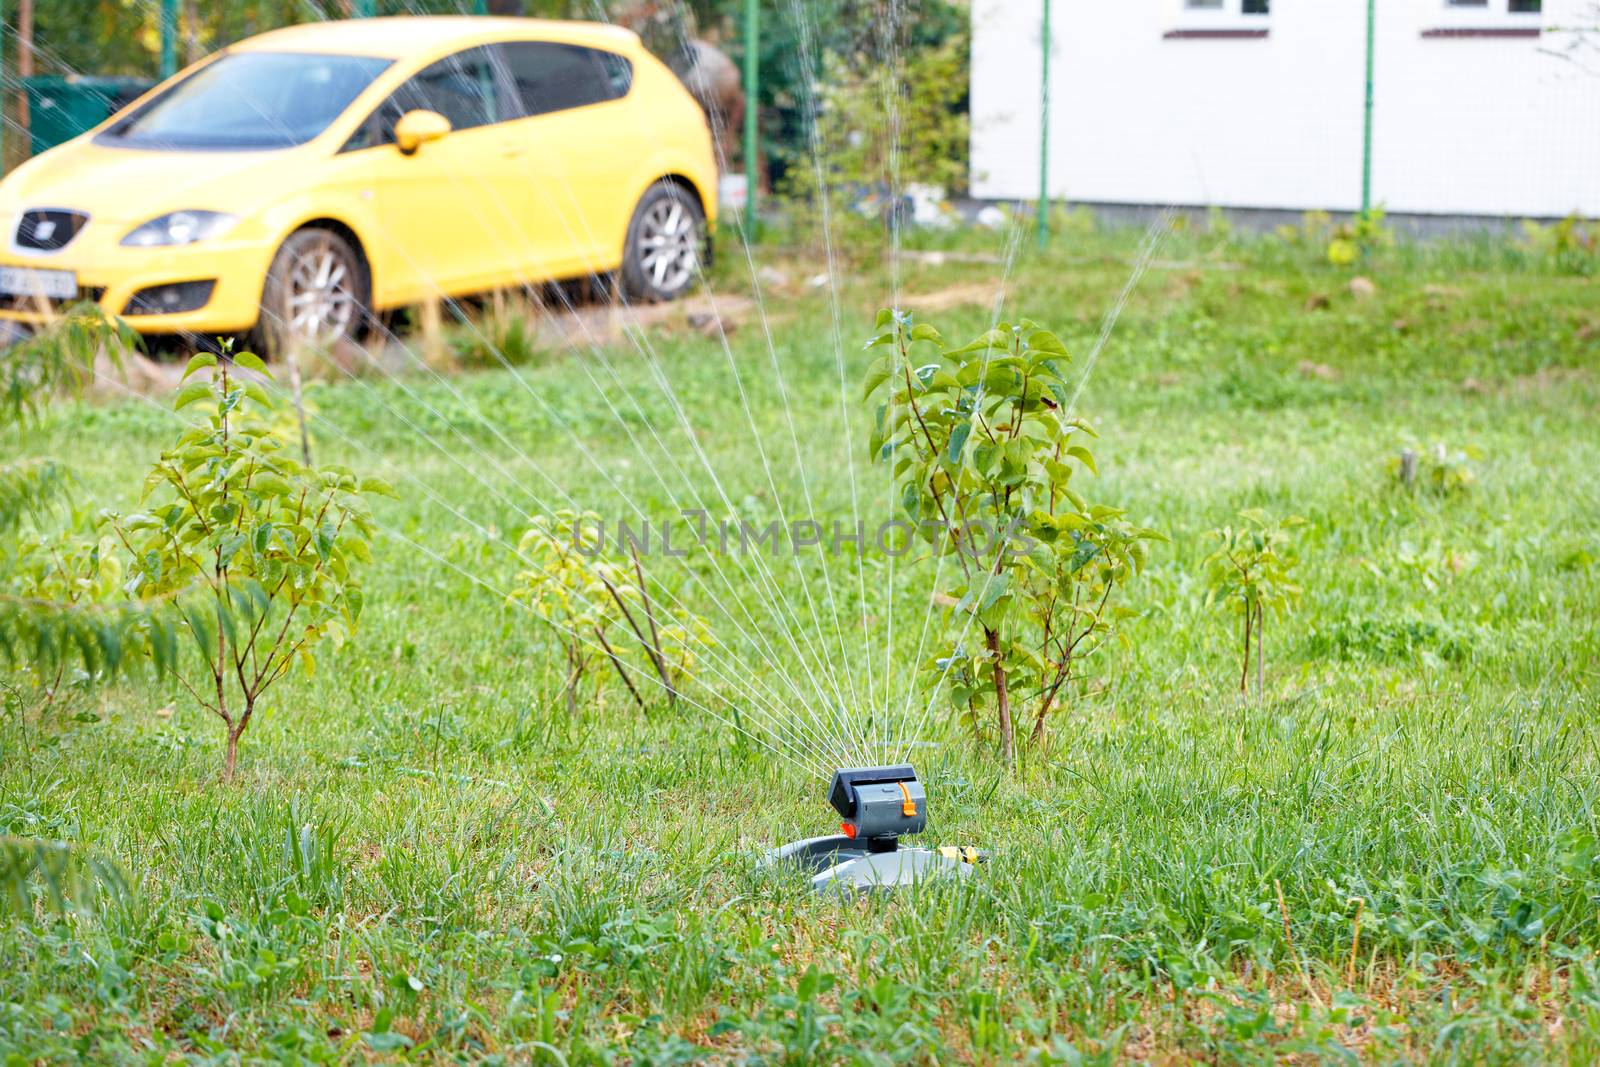 An automatic sprayer irrigates green lawns and young trees in the backyard of a private house. by Sergii